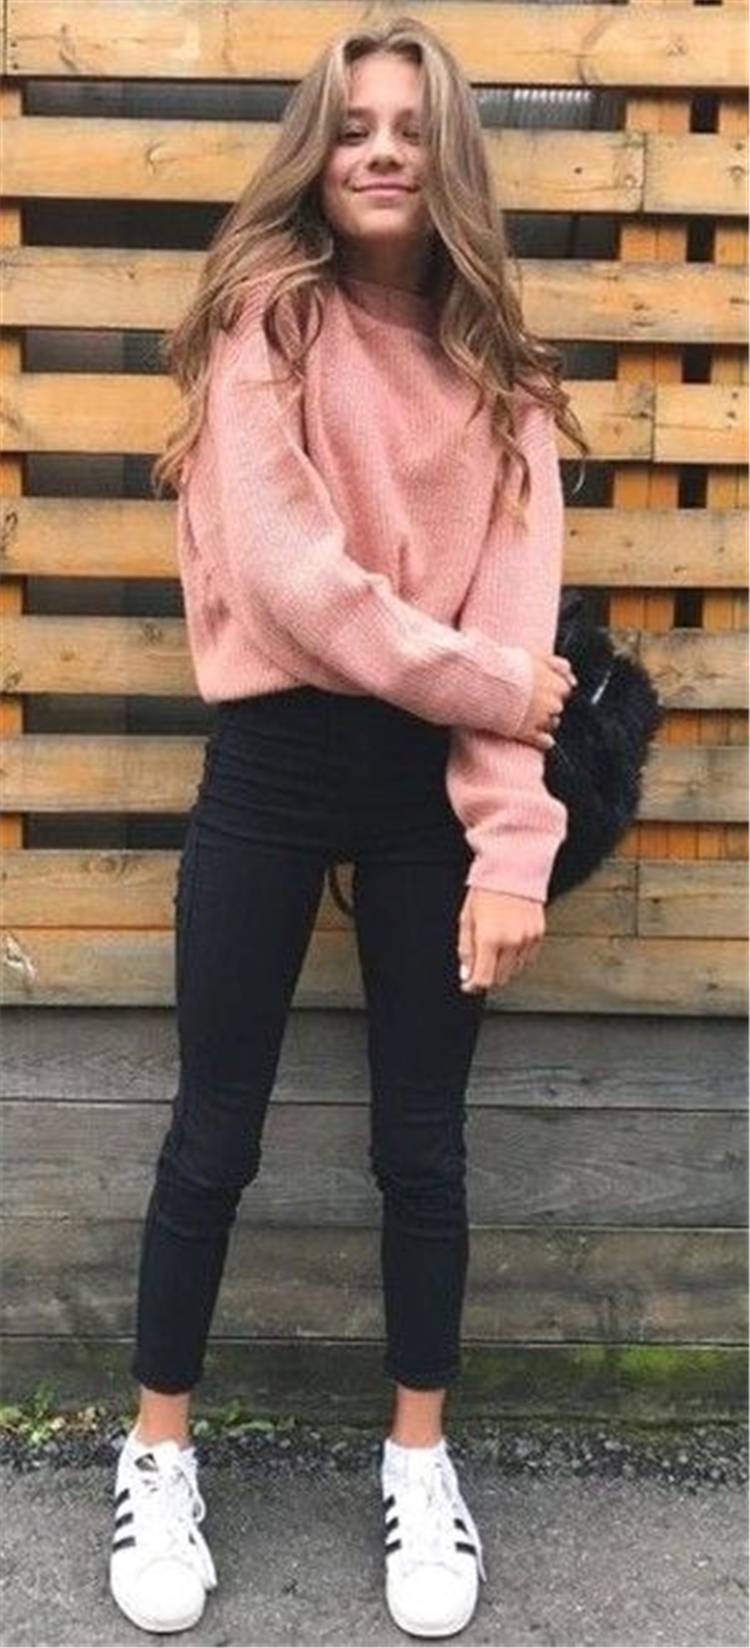 Tredny Back To School Fall Outfits For School Girls; Fall Outfits; Outfits; School Outfits; Back To School Outfits; Girl Outfits; Sweater; Hoodie #schooloutfits #falloutfits #backtoschooloutfits #girloutfits #fallschooloutfits 